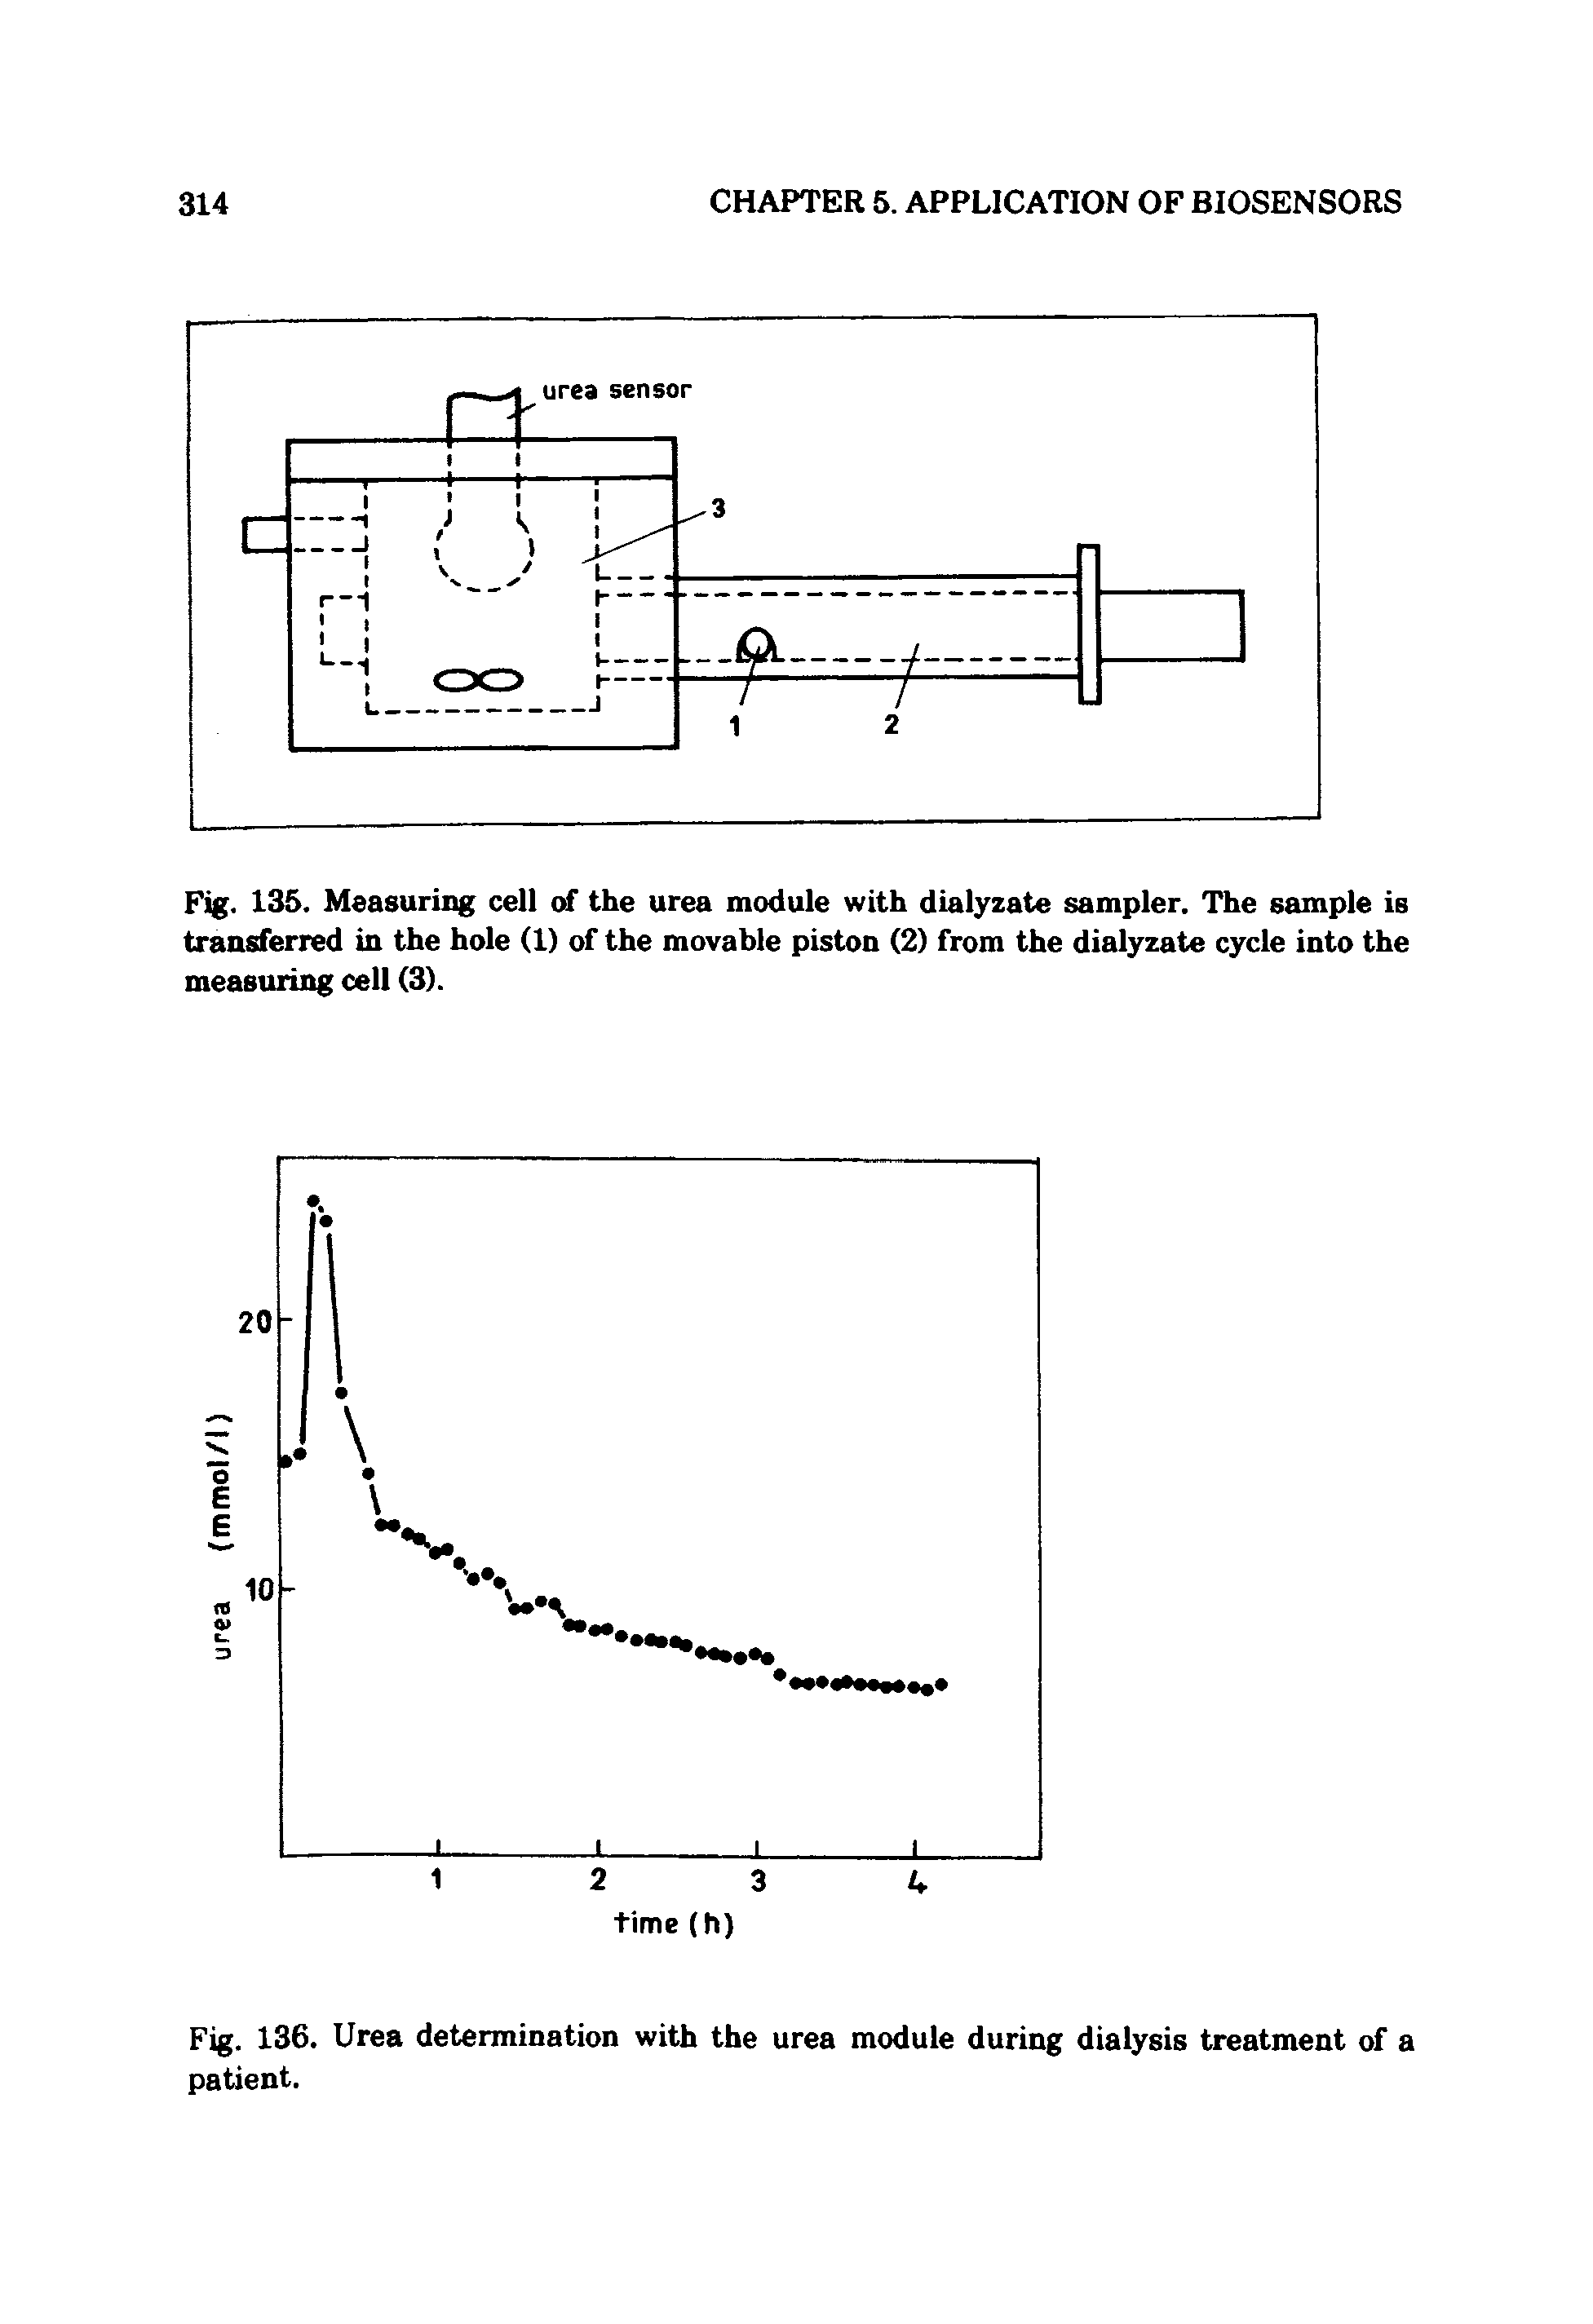 Fig. 136. Urea determination with the urea module during dialysis treatment of a patient.